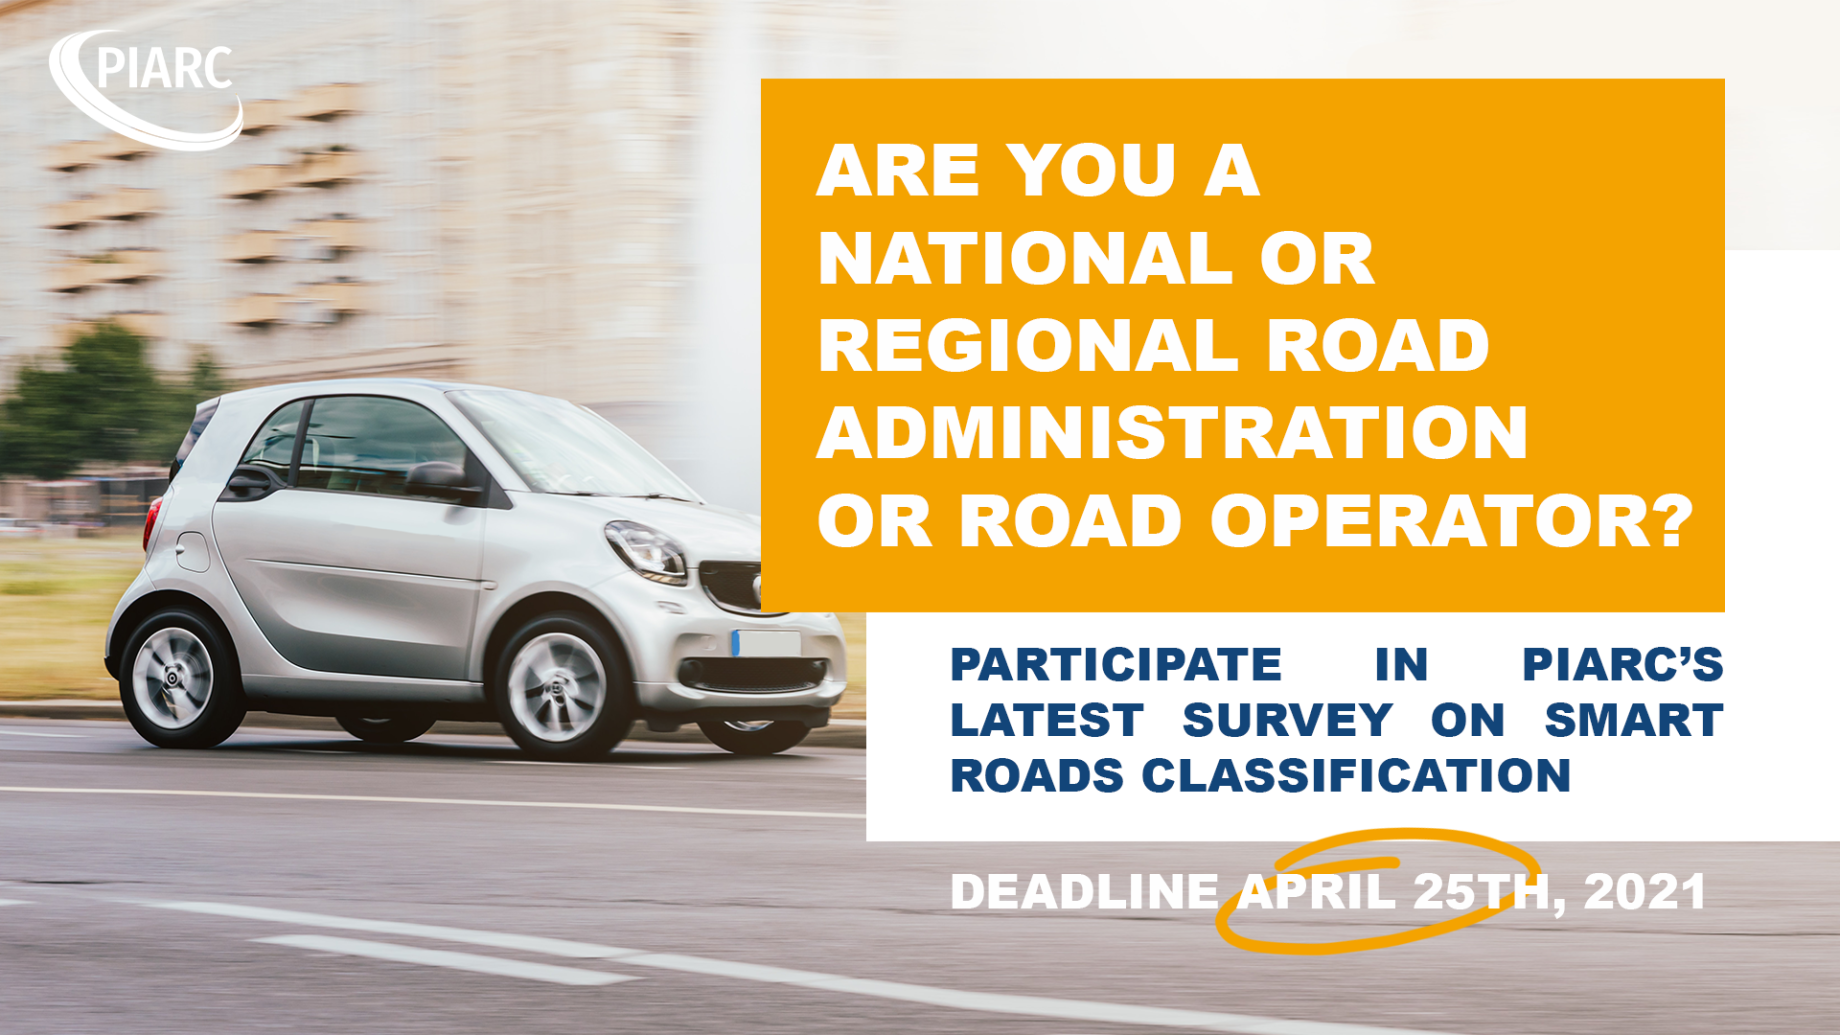 Take part in the International Survey for PIARC’s Special Project “Smart Roads Classification”